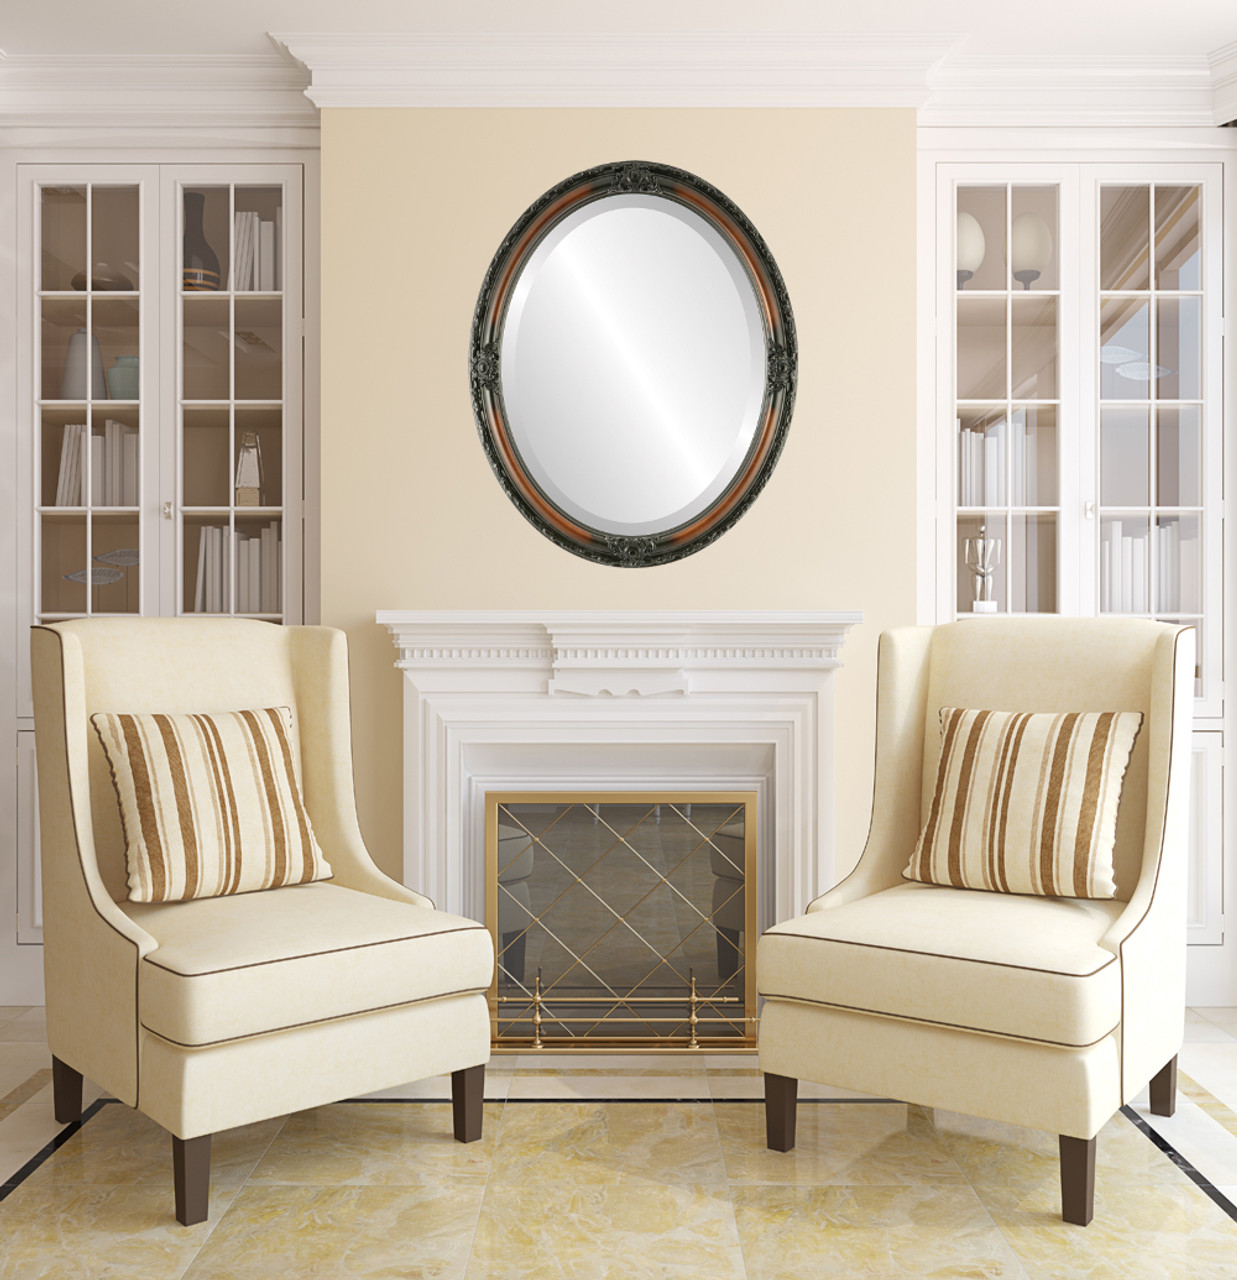 Antique Brown Oval Mirrors from $136 Free Shipping